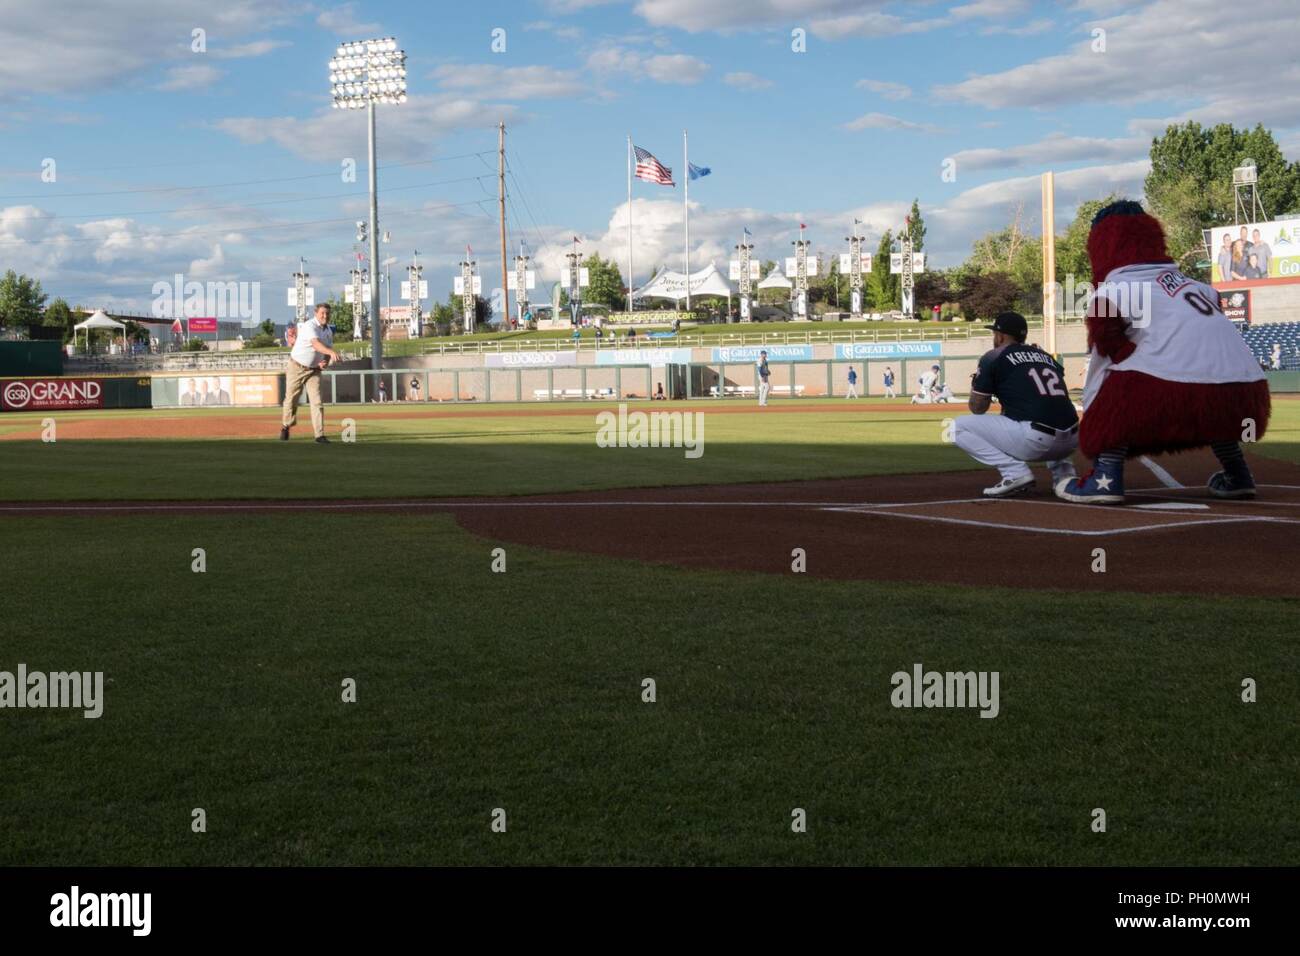 Photos: Rainiers win their home opener against the Reno Aces 12-5